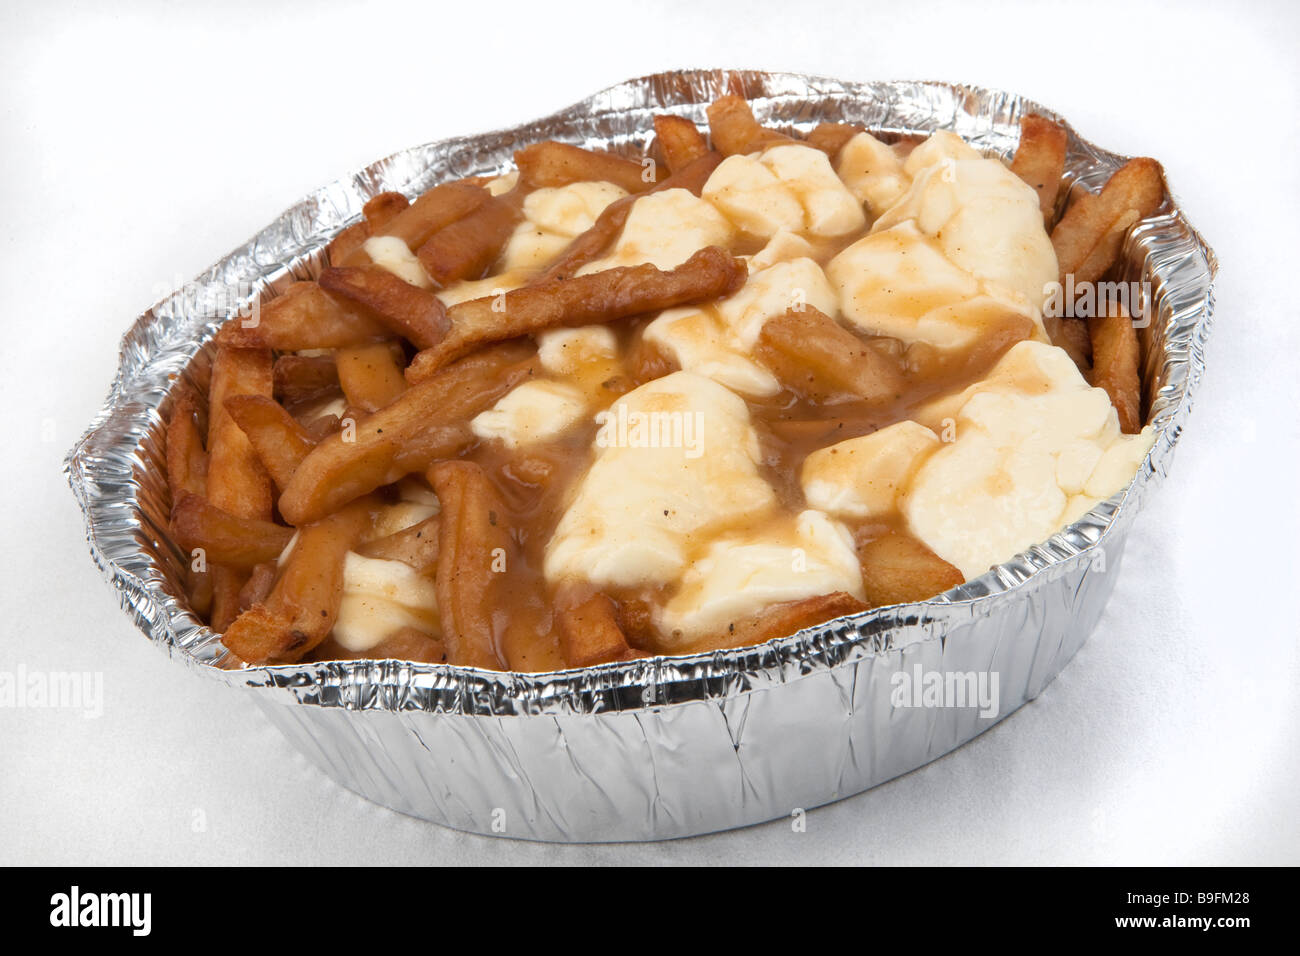 A poutine over a white background Poutine is a French Canadian dish consisting of French fries topped with fresh cheese curds Stock Photo